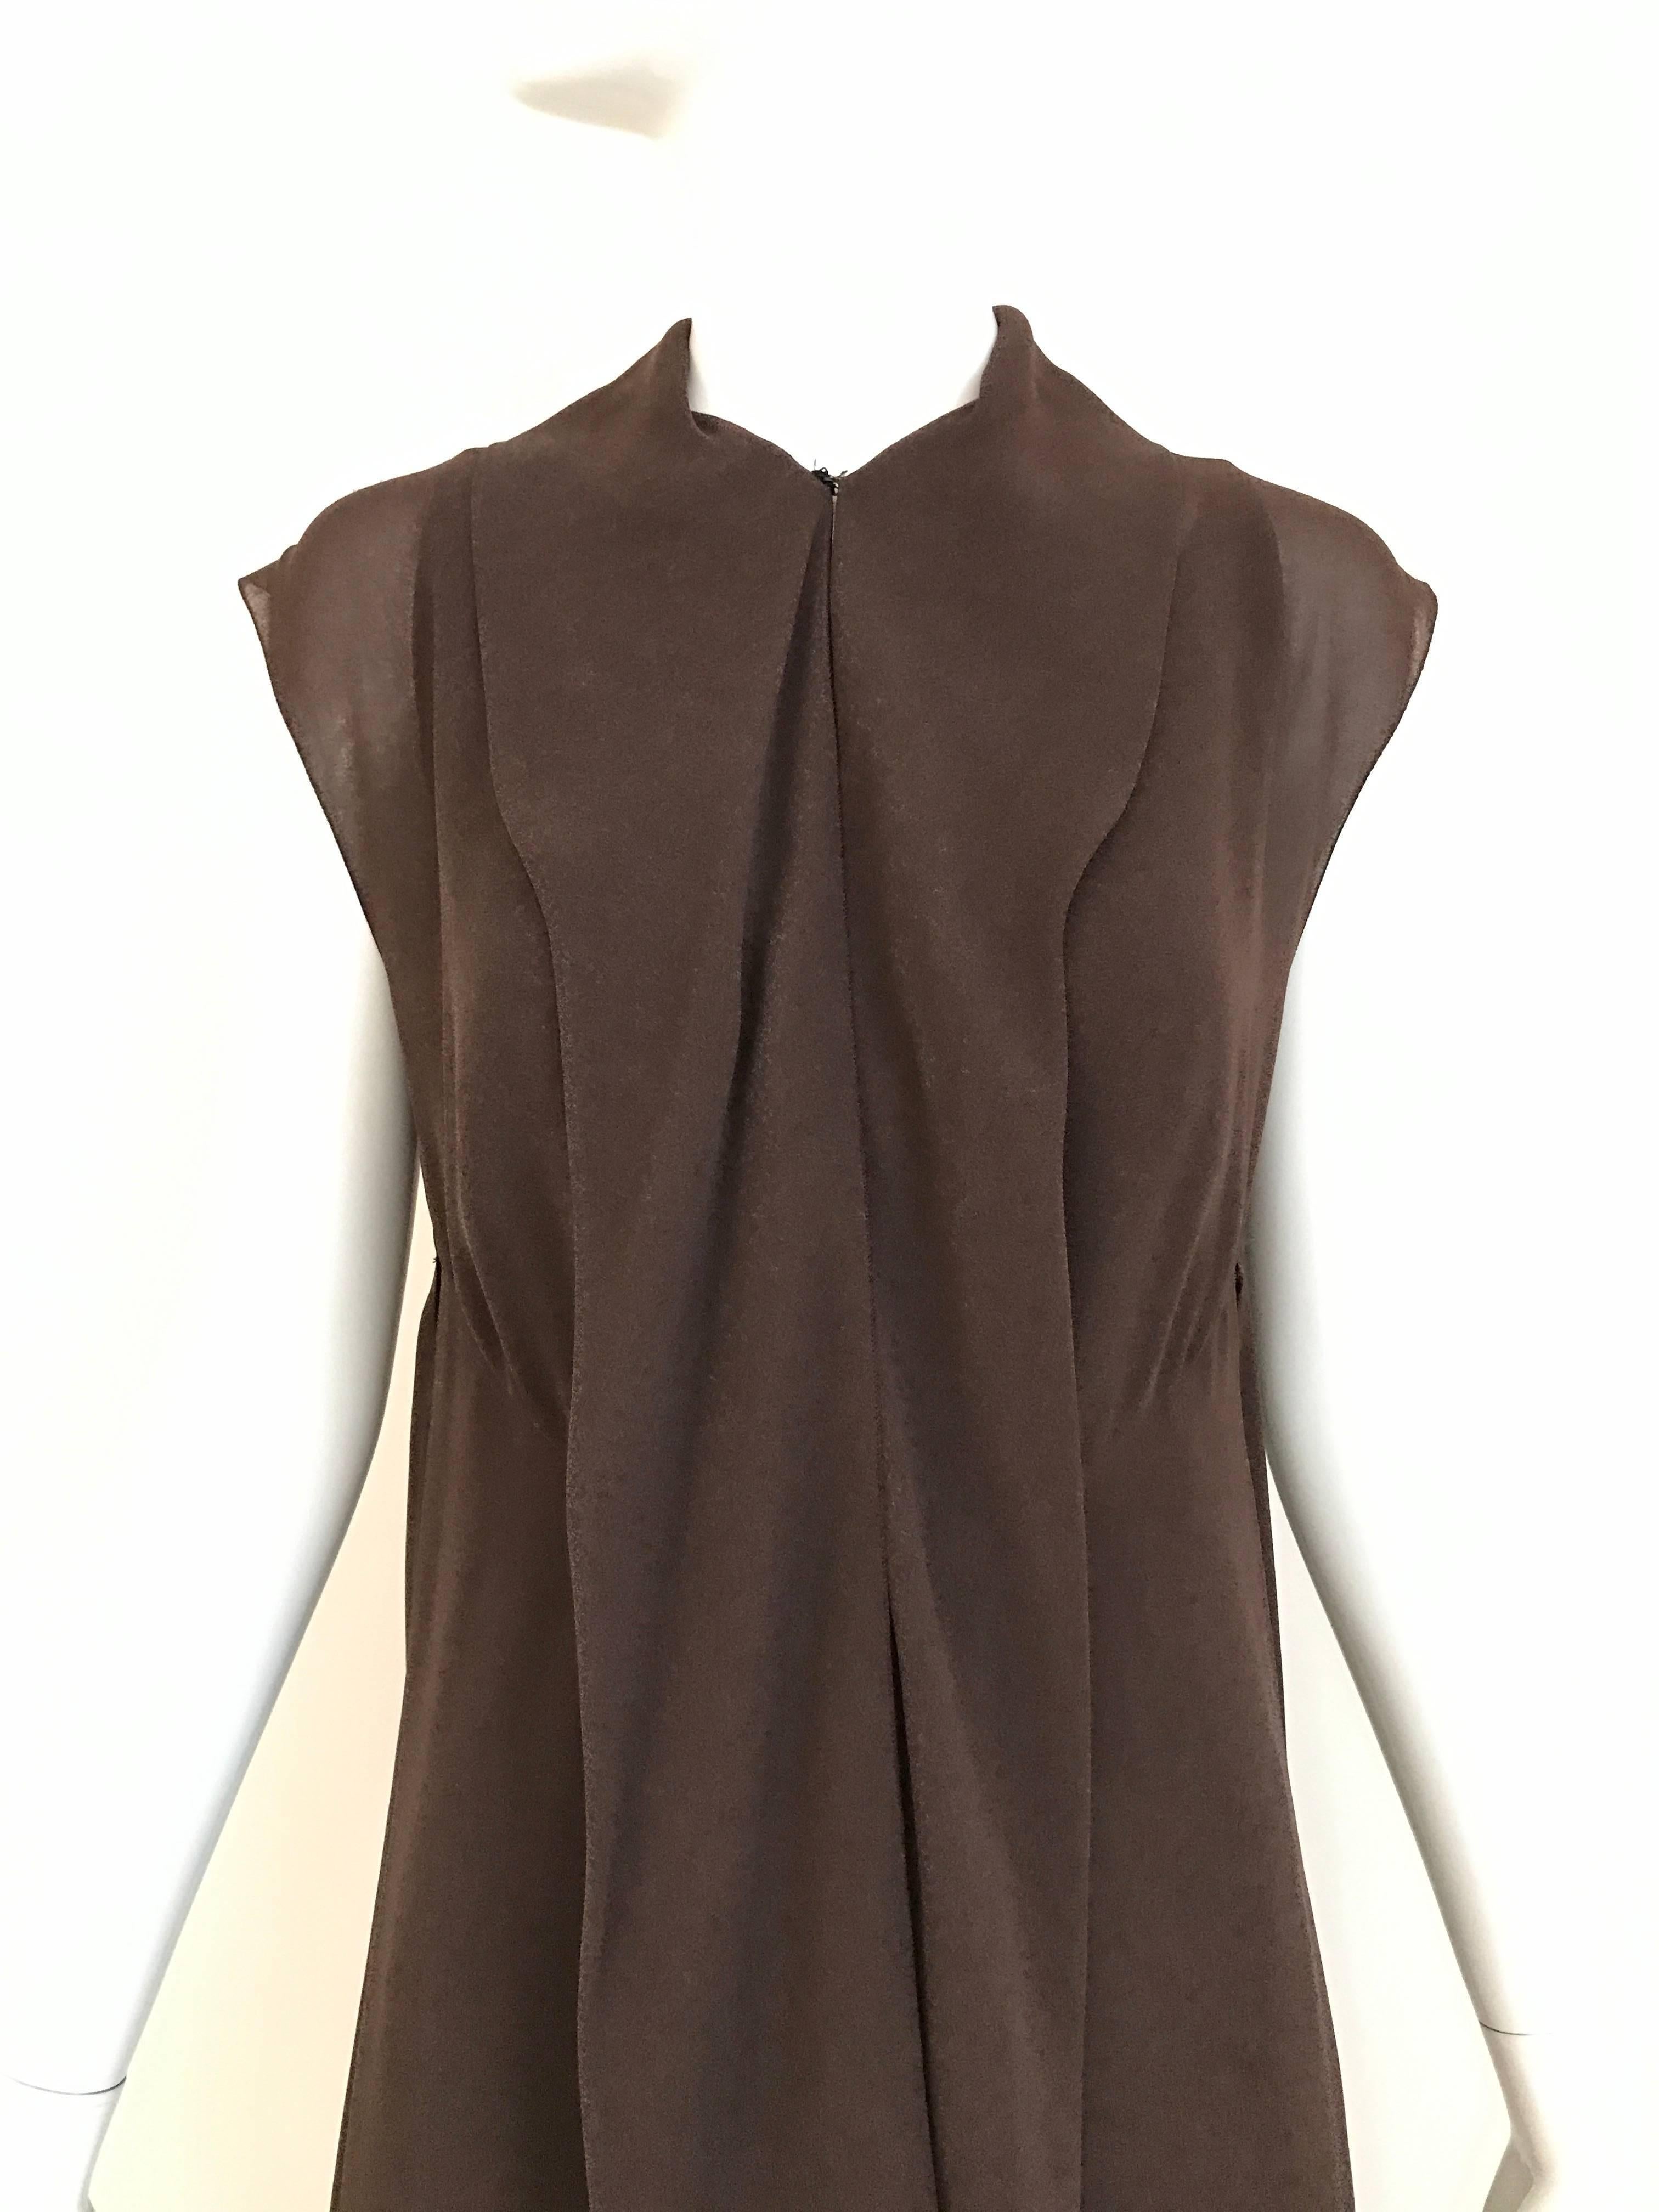 Women's 1990s CHANEL Brown Crepe Dress with Sleeveless Overlay Long Vest